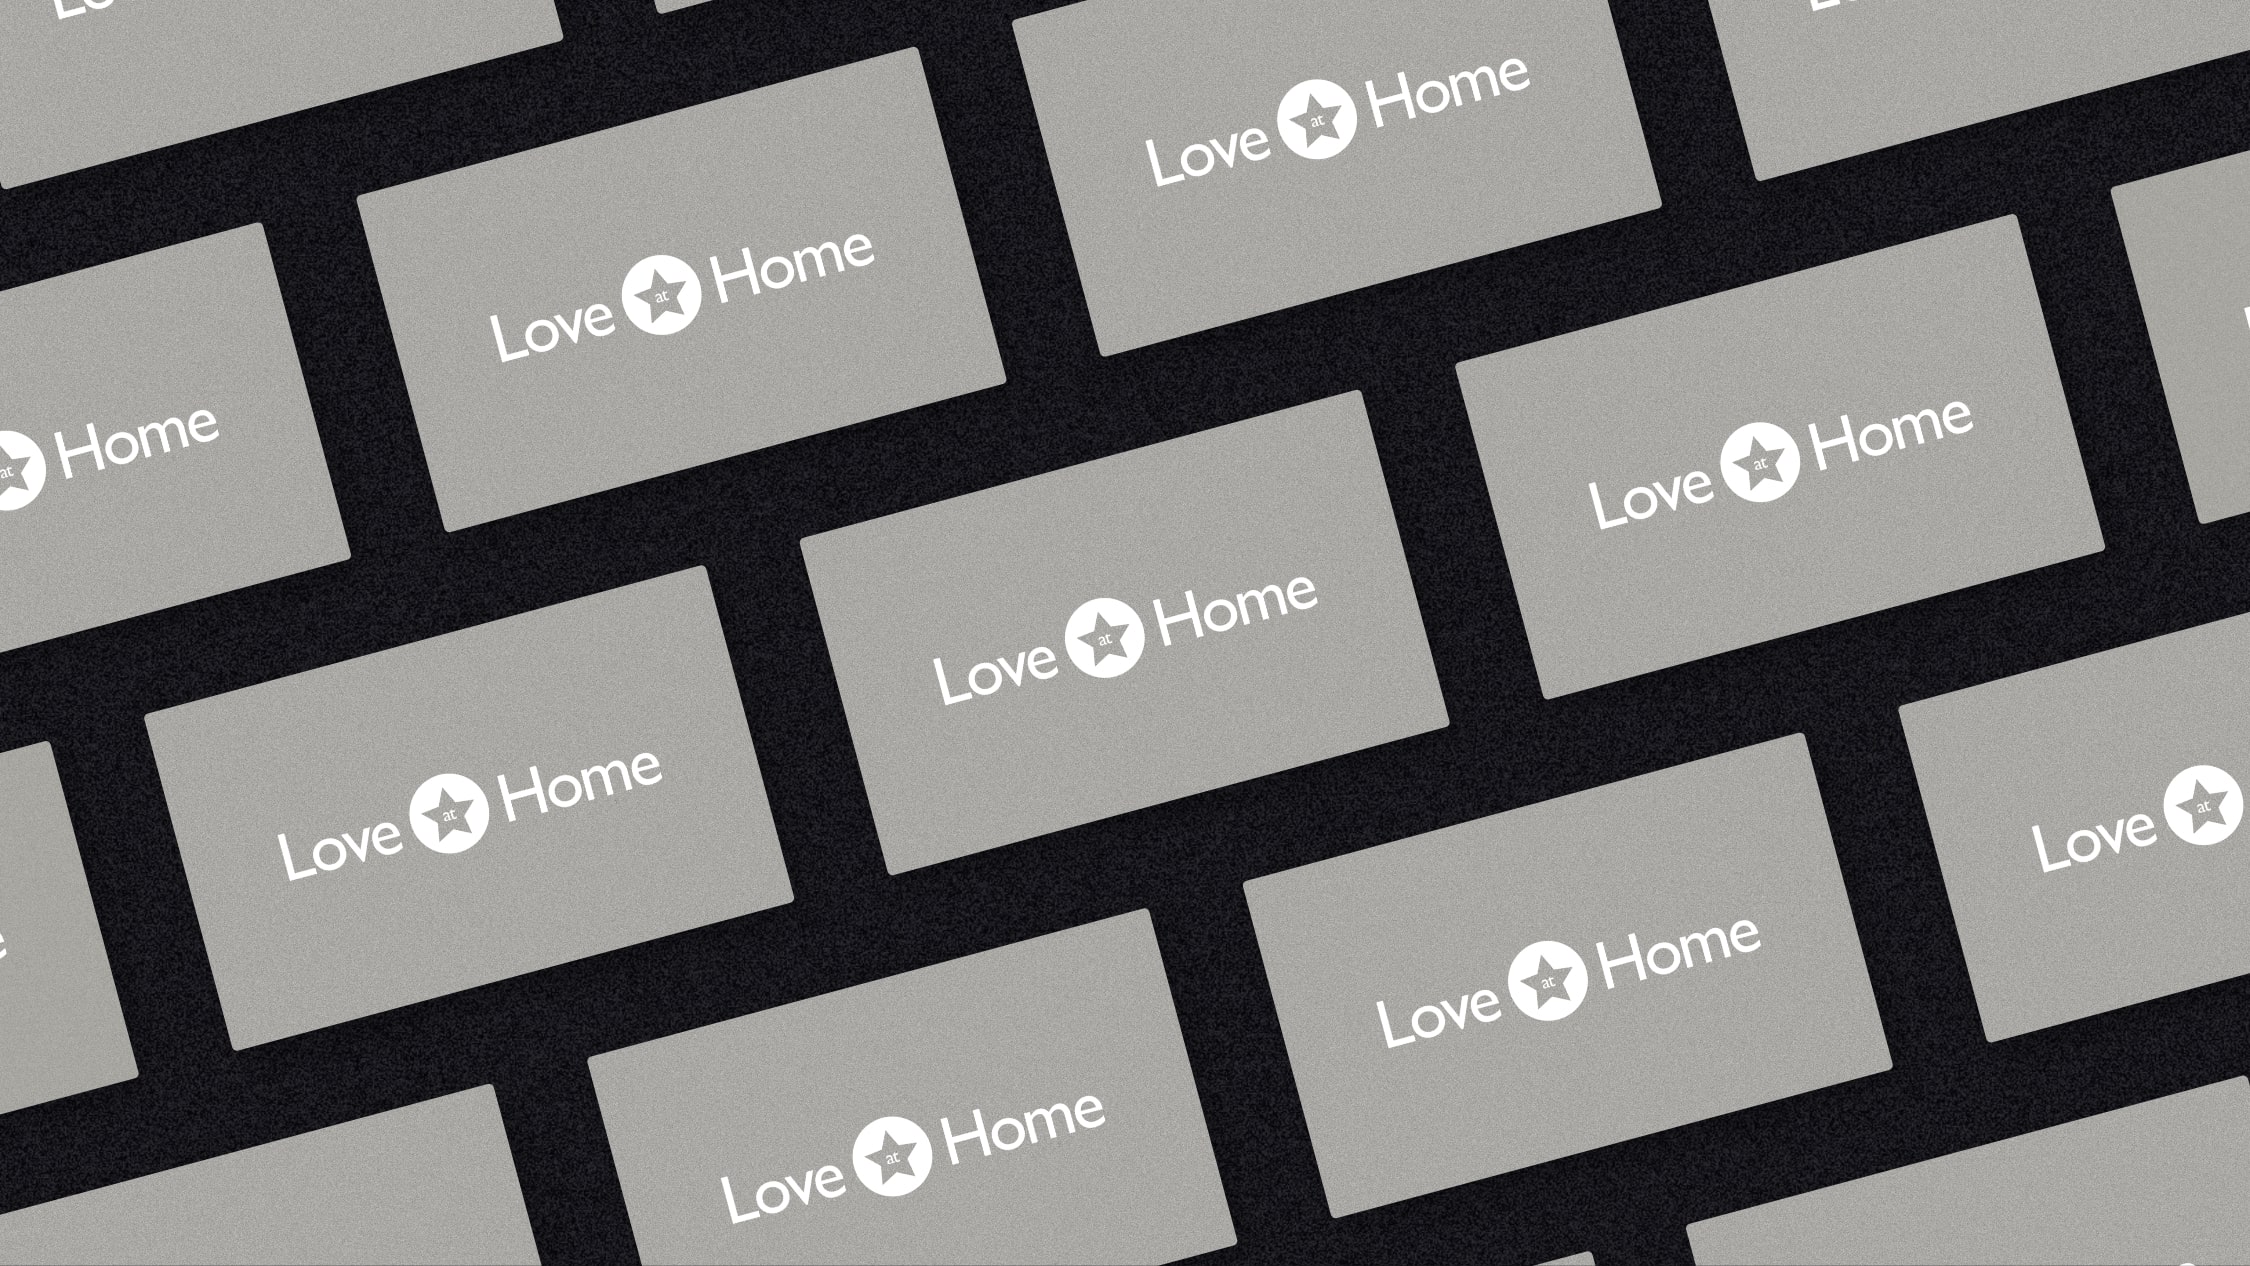 Love at Home business cards